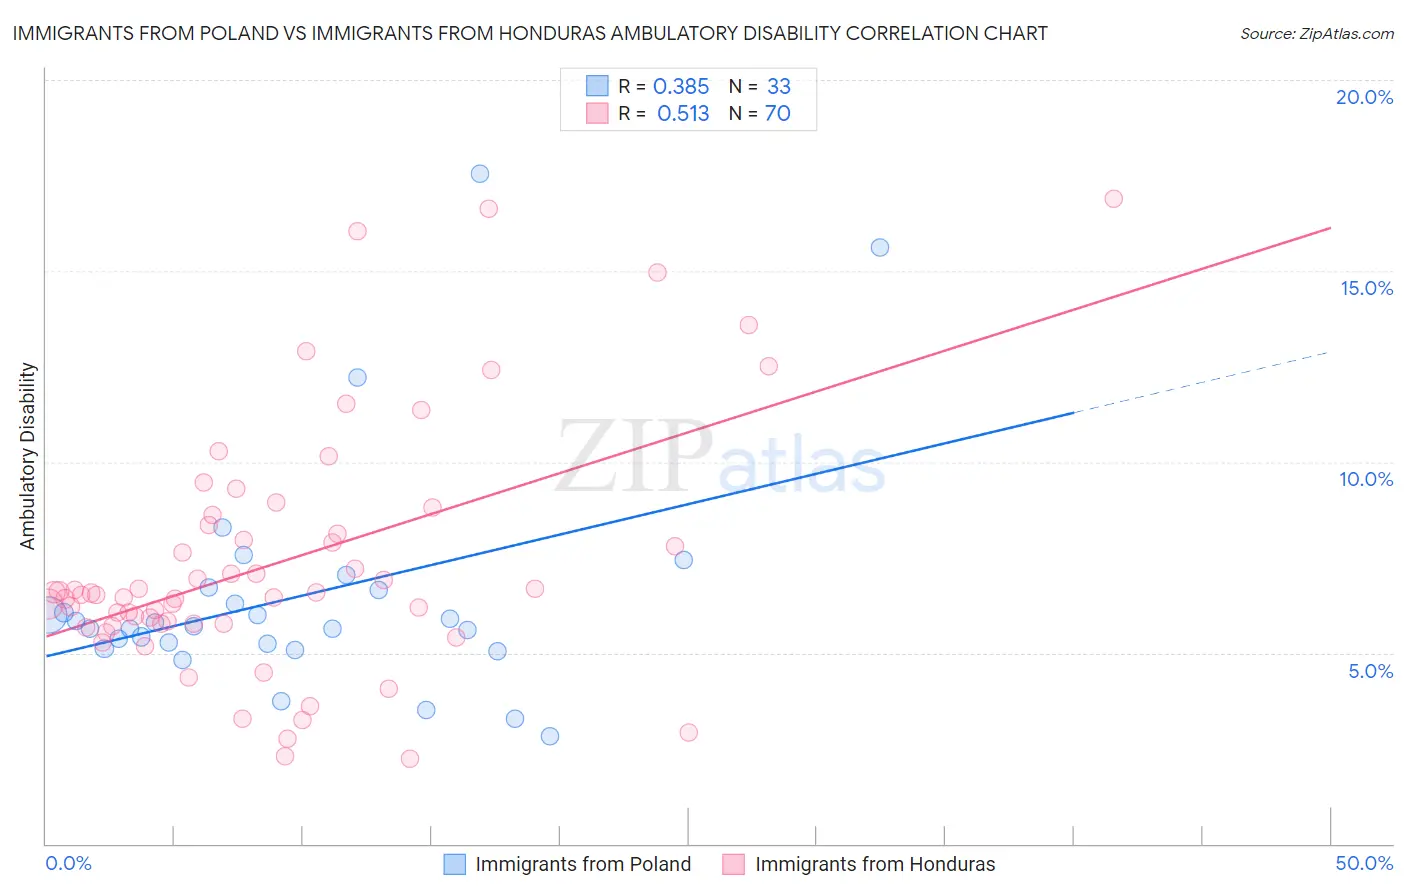 Immigrants from Poland vs Immigrants from Honduras Ambulatory Disability